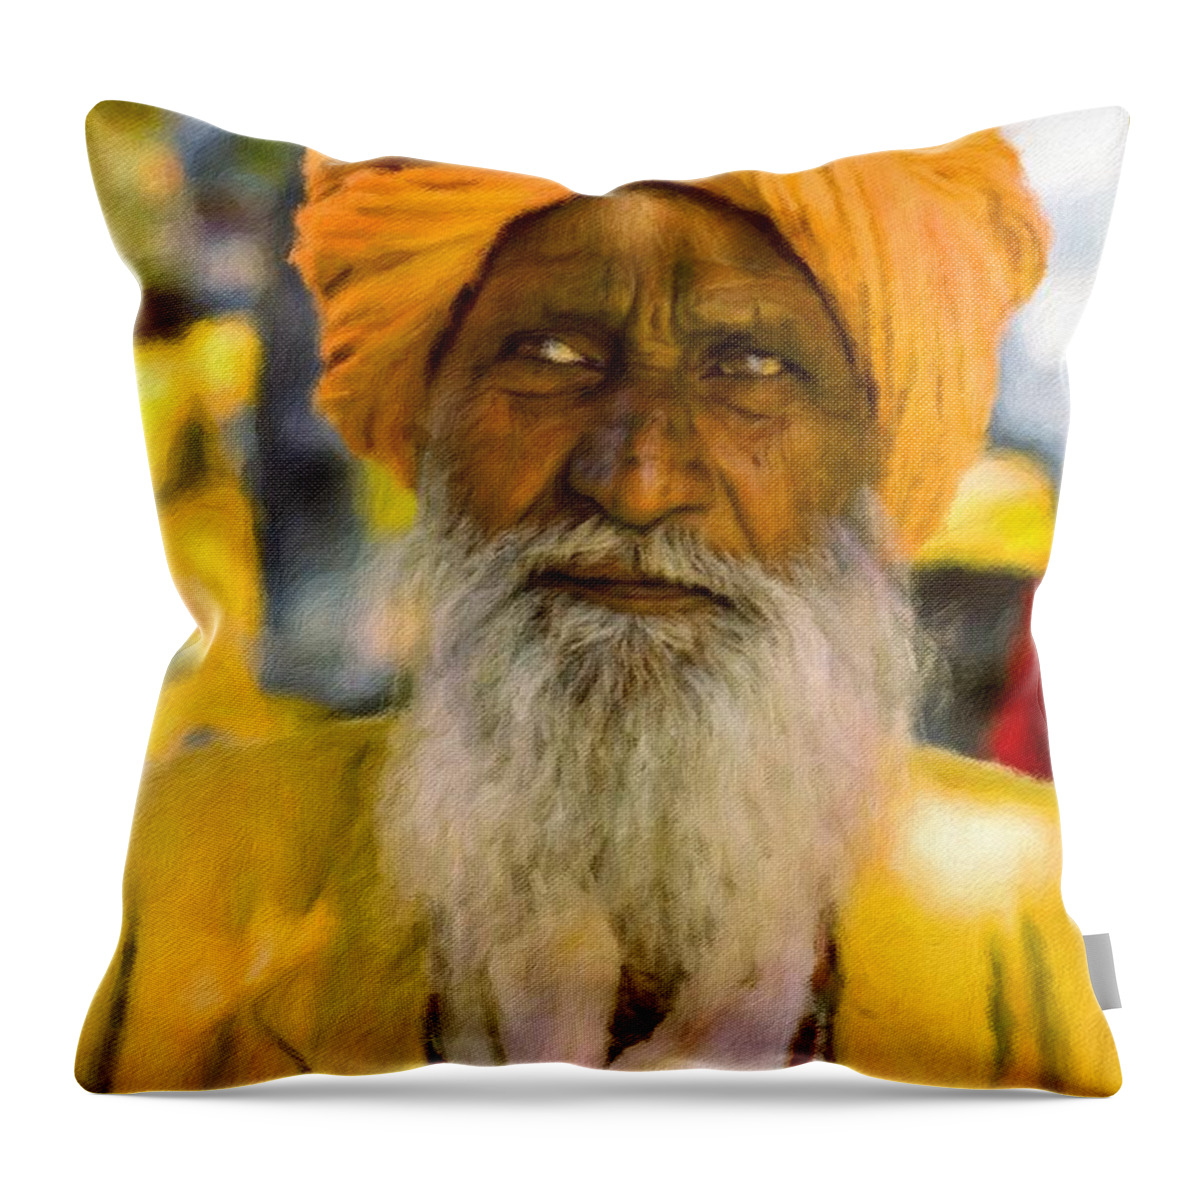 Indian Man Throw Pillow featuring the painting Indian old man by Vincent Monozlay